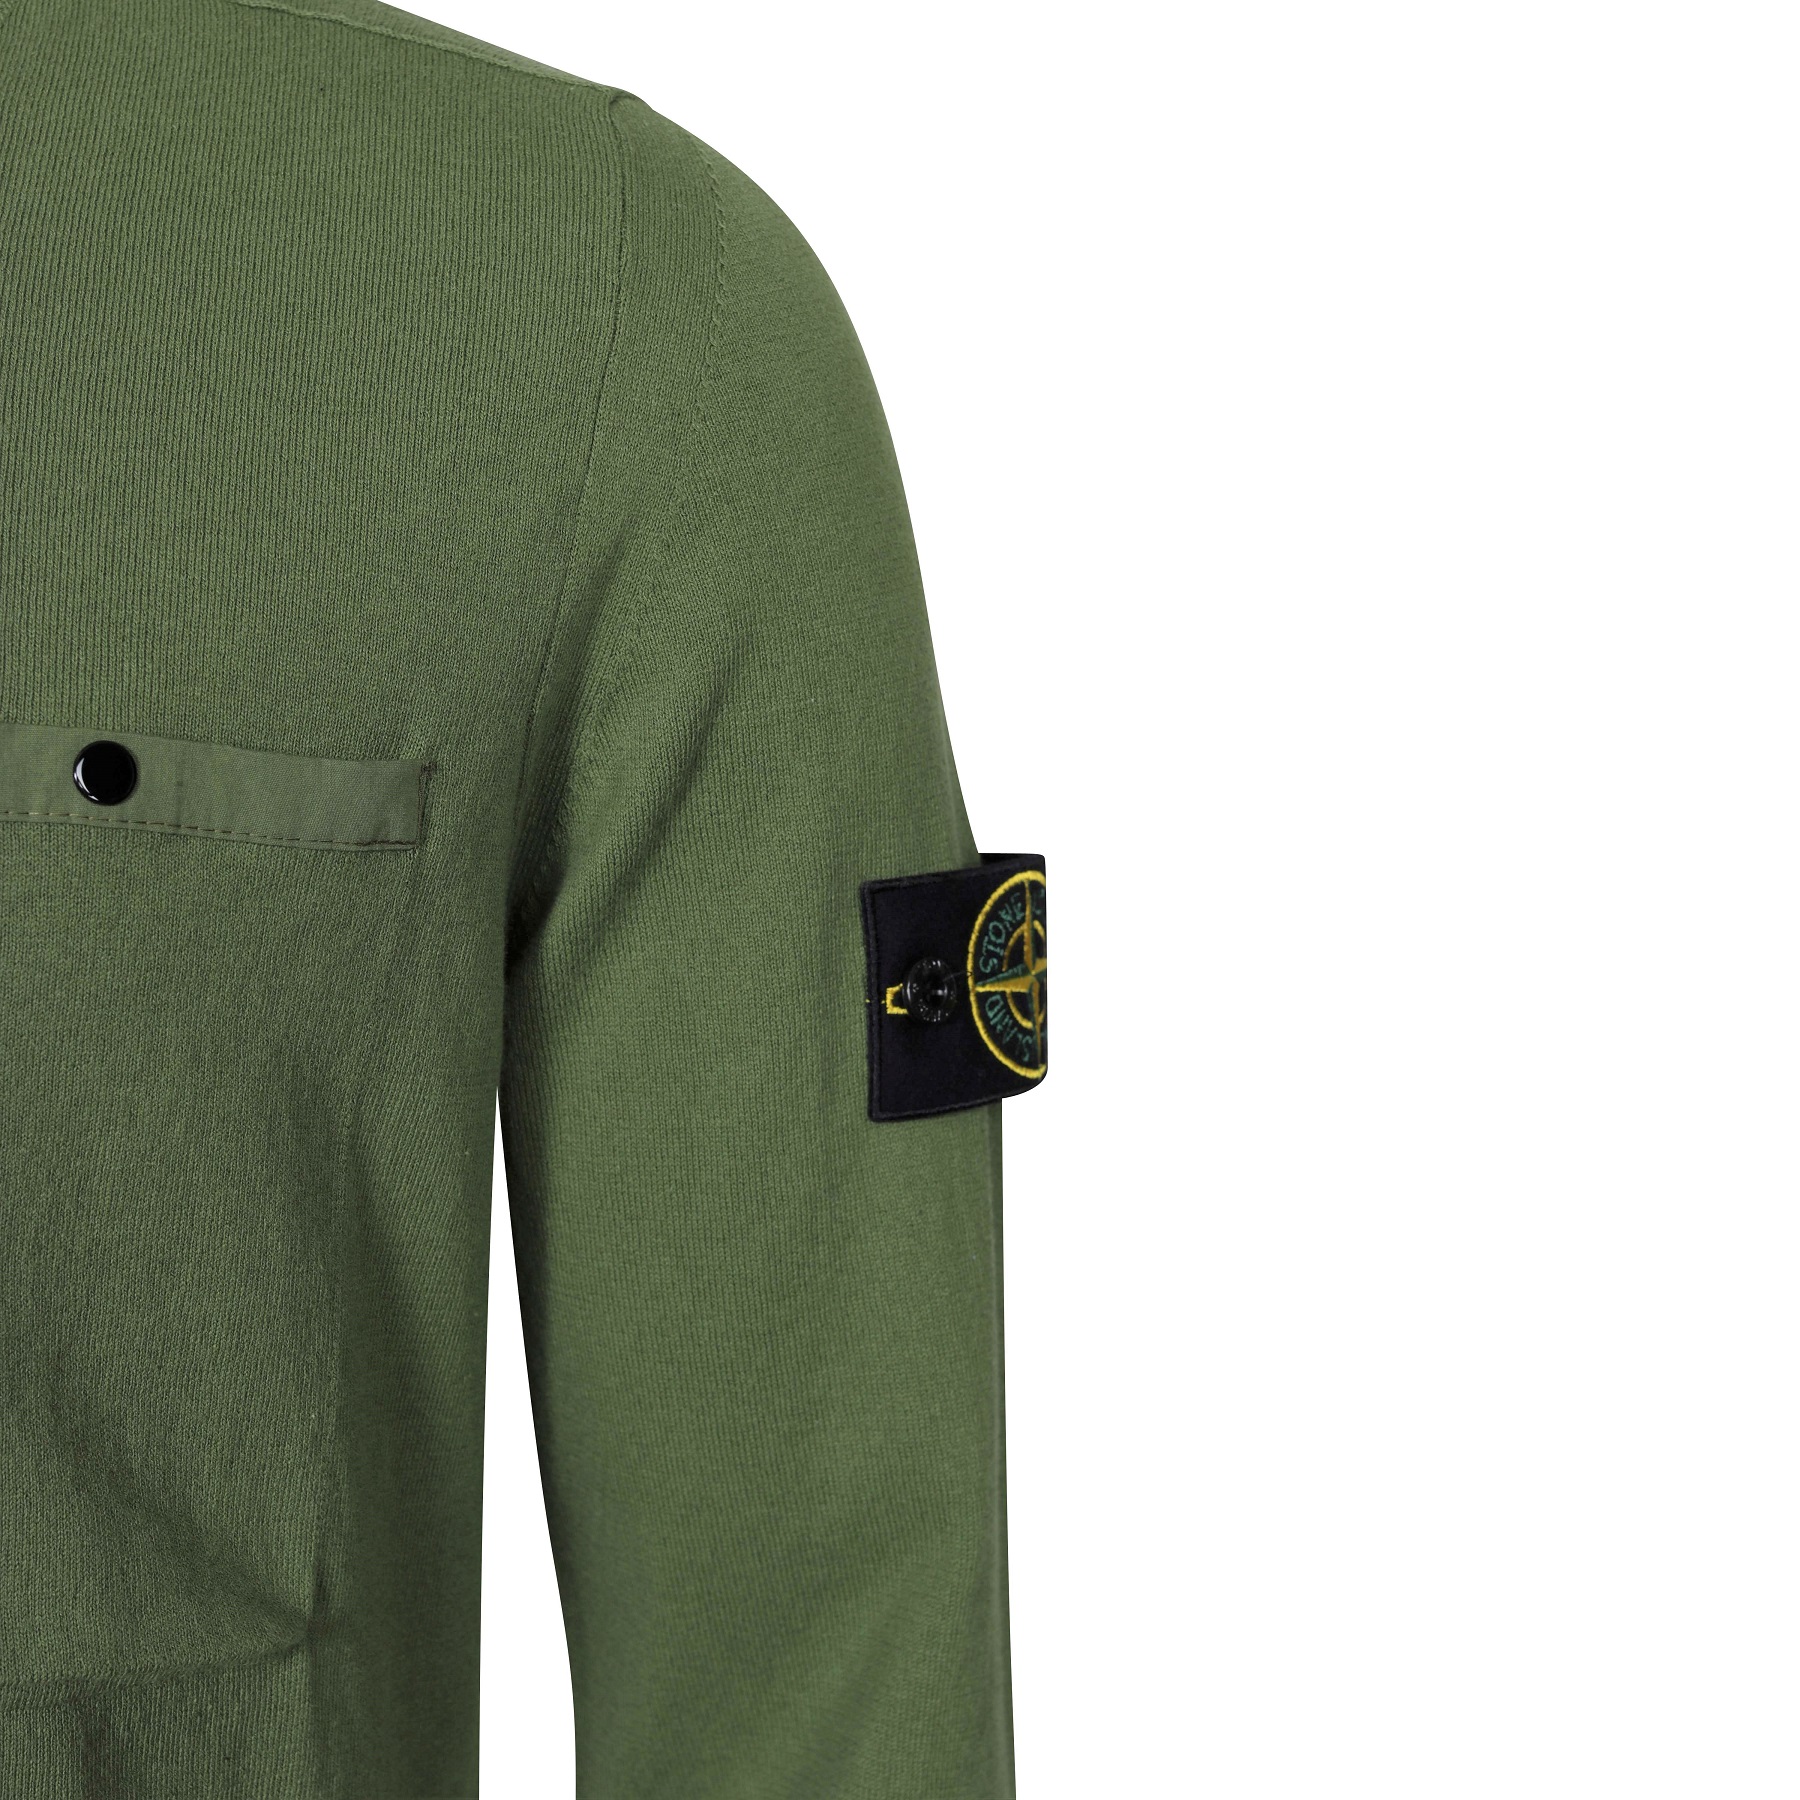 Stone Island Chest Pocket Knit Sweater in Olive  XL